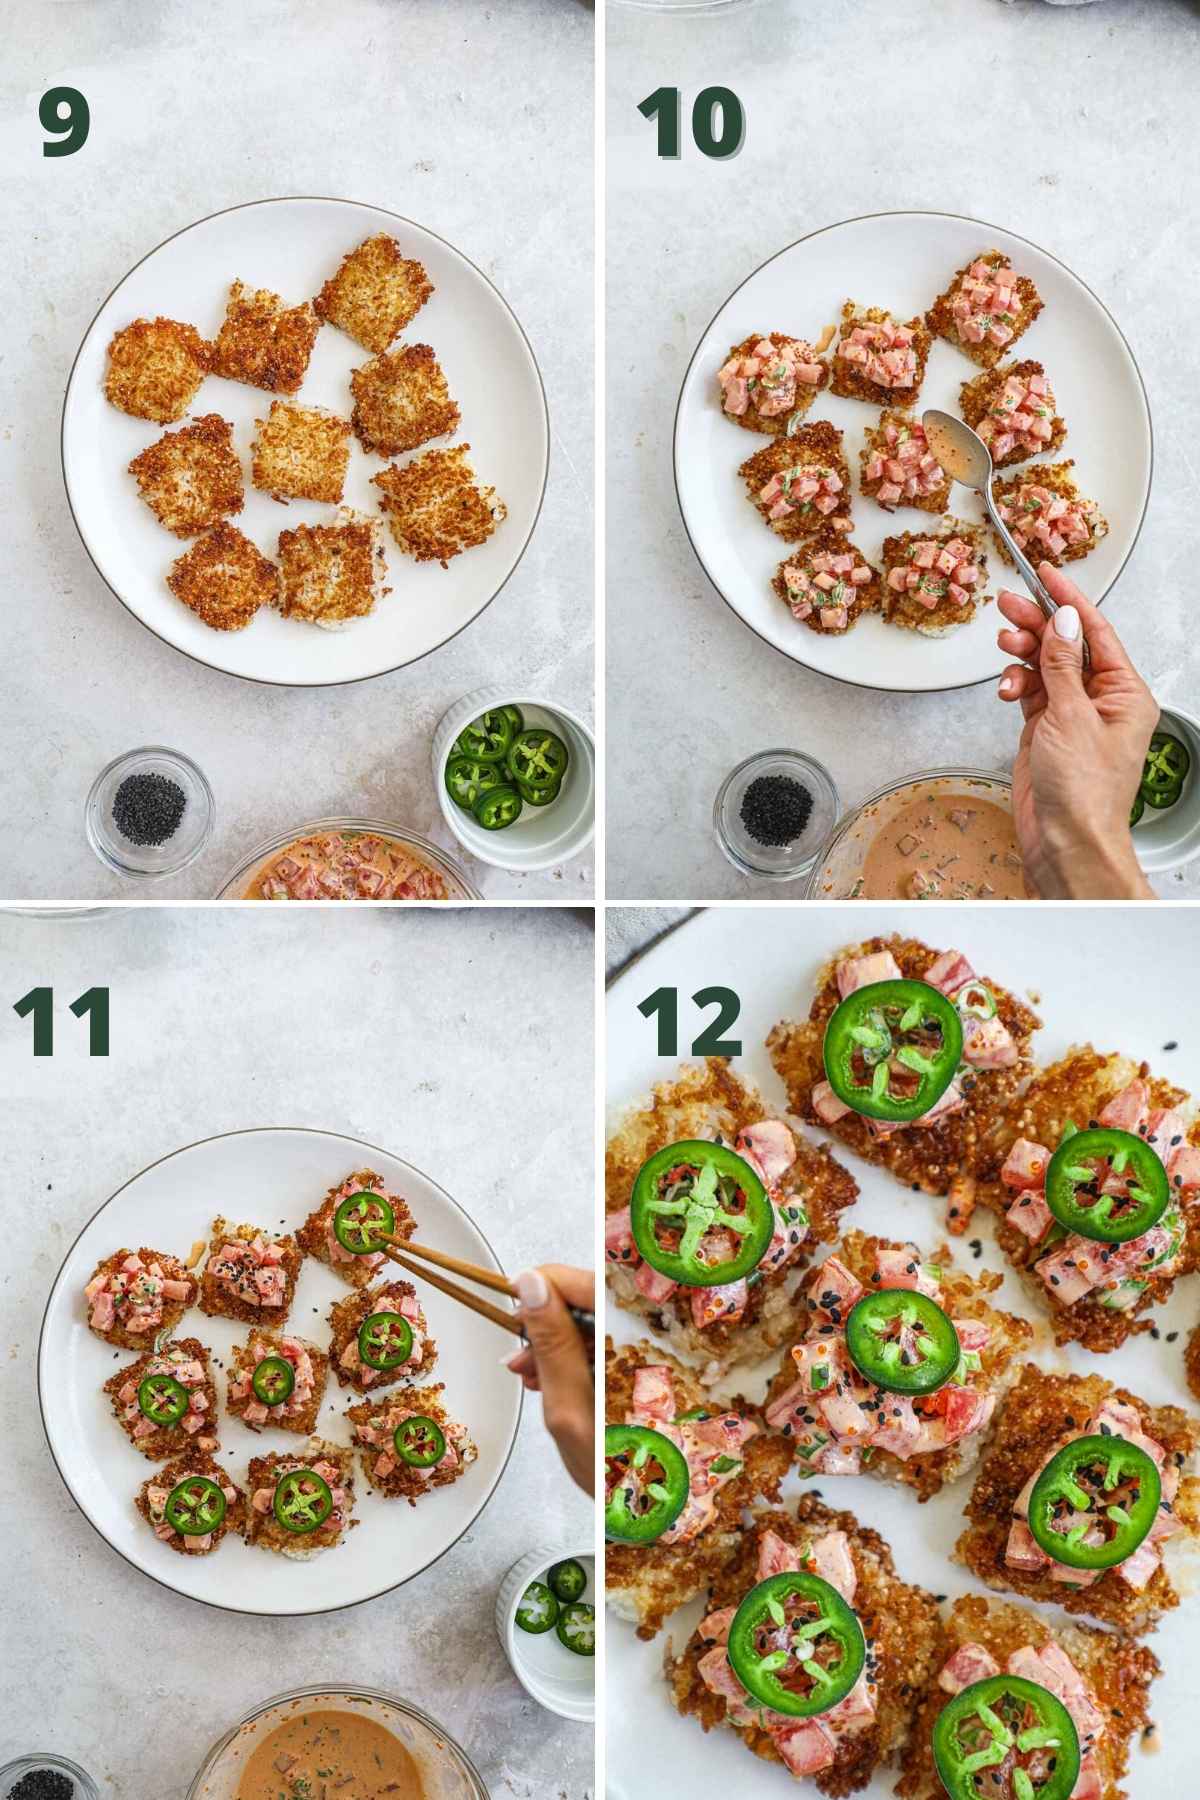 Steps to make spicy tuna with crispy rice, including placing the crispy rice on a platter, topping with spicy tuna, and topping with jalapeños.